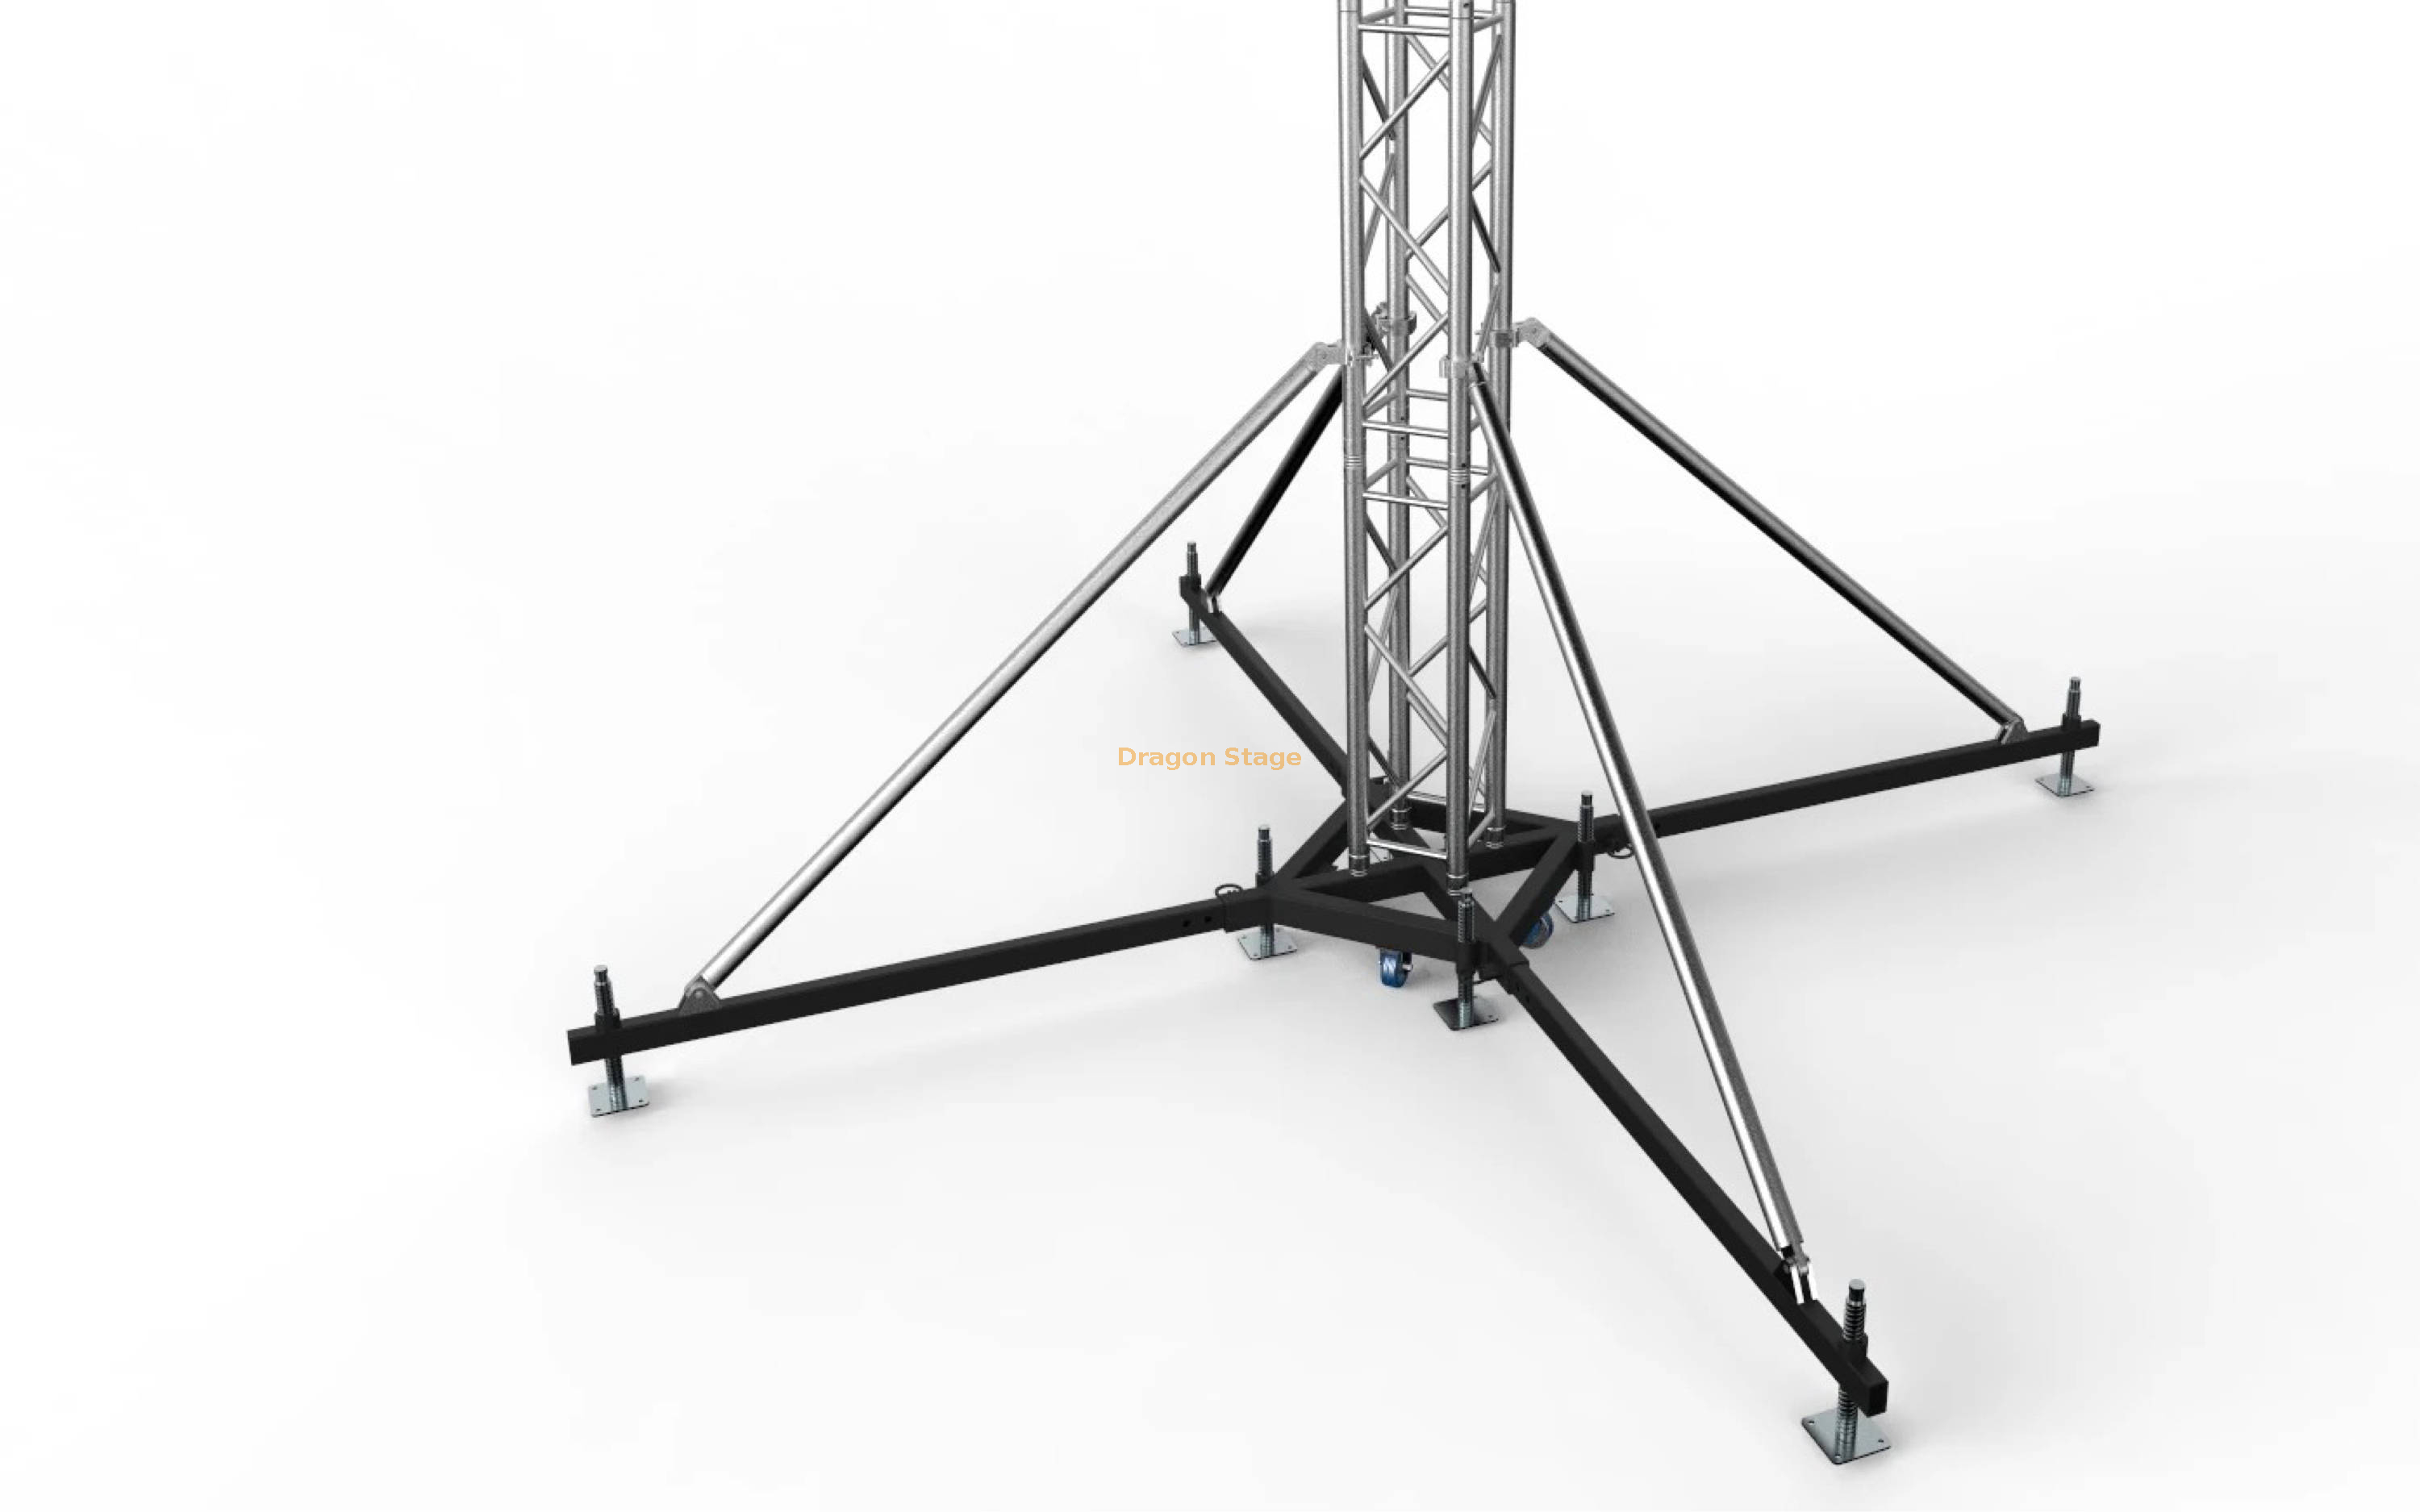 Mobile Dj Lighting Truss Tower for Outdoor Event Lumination 6m High (2)